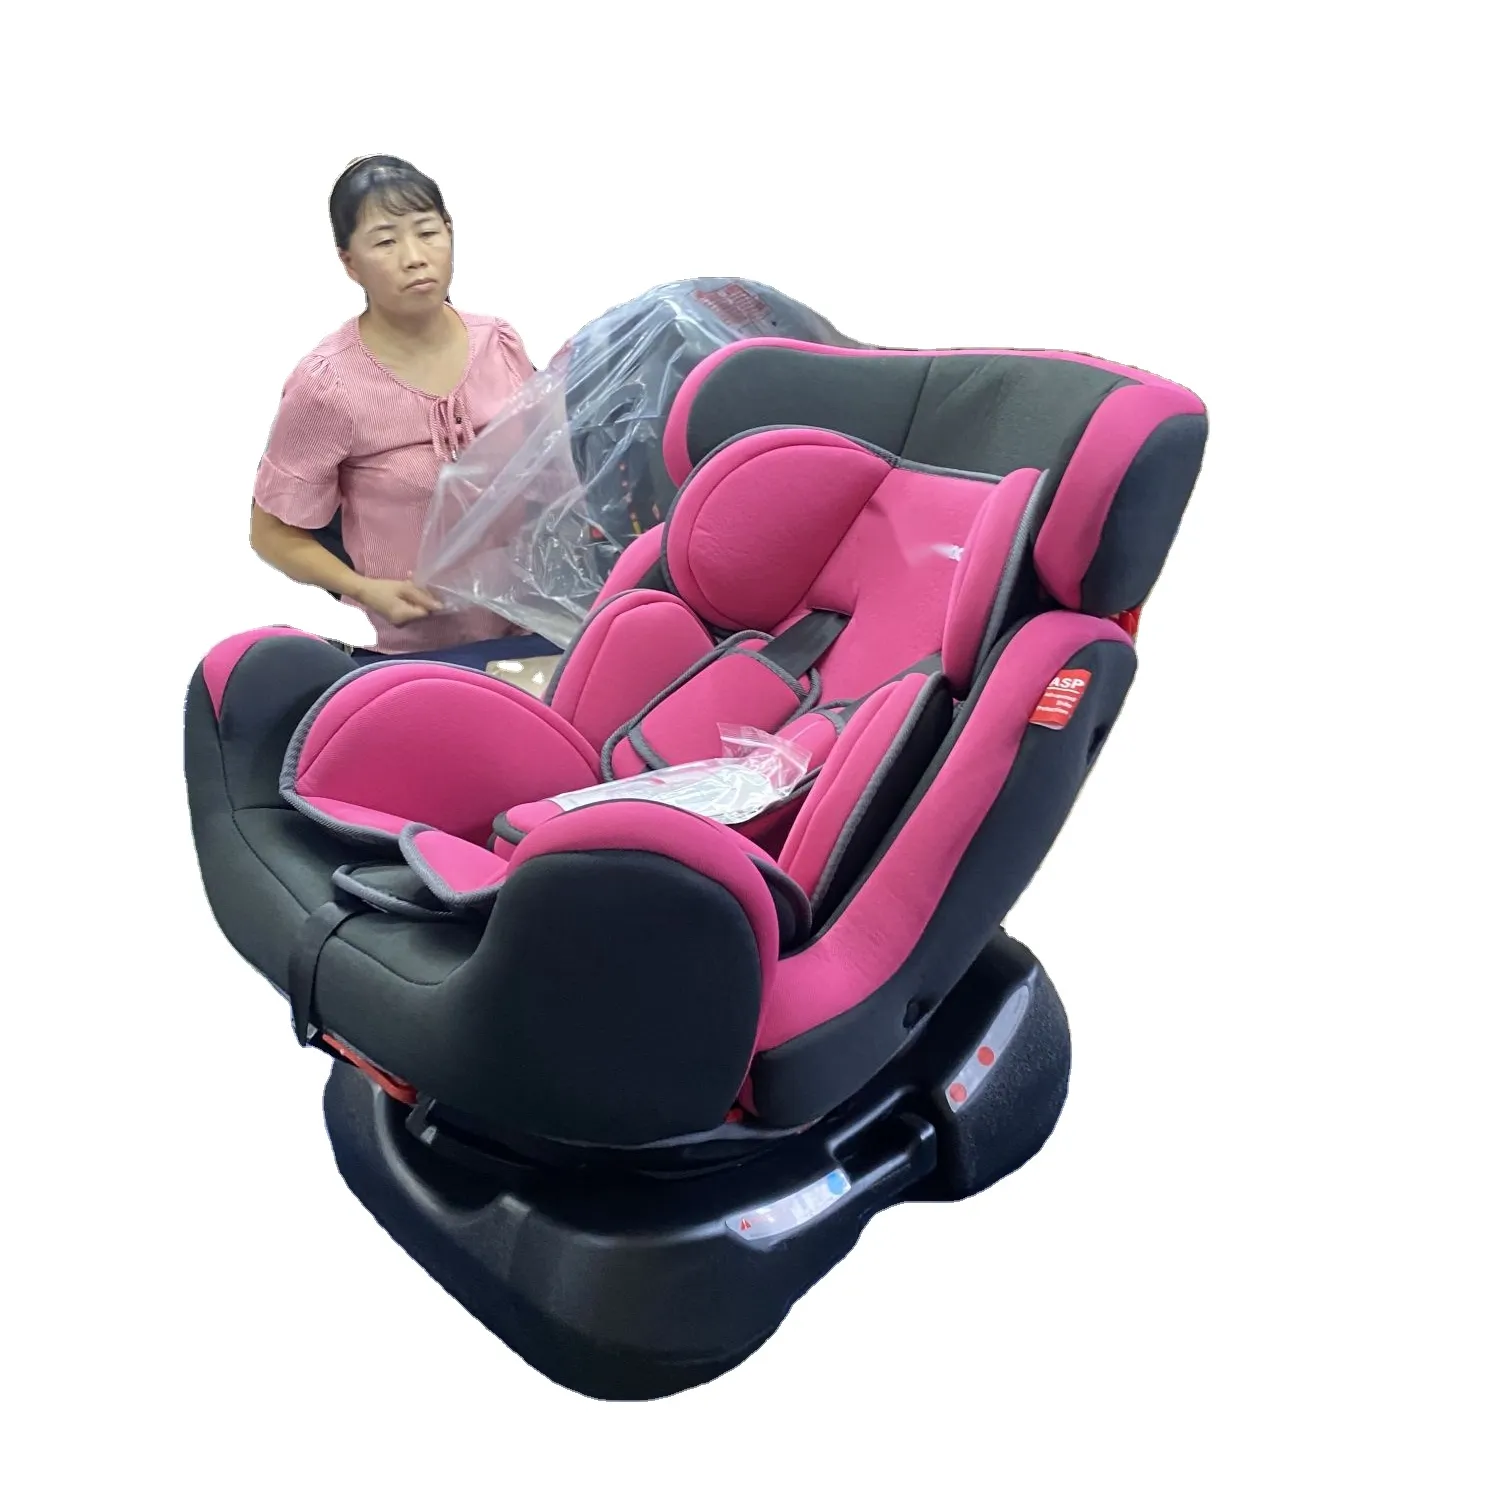 Factory Direct Luxury 0-25kgs Child Car Seat Toys Baby Carseats Isofix Group012 Infant Convertible Baby Car Seats For Babies